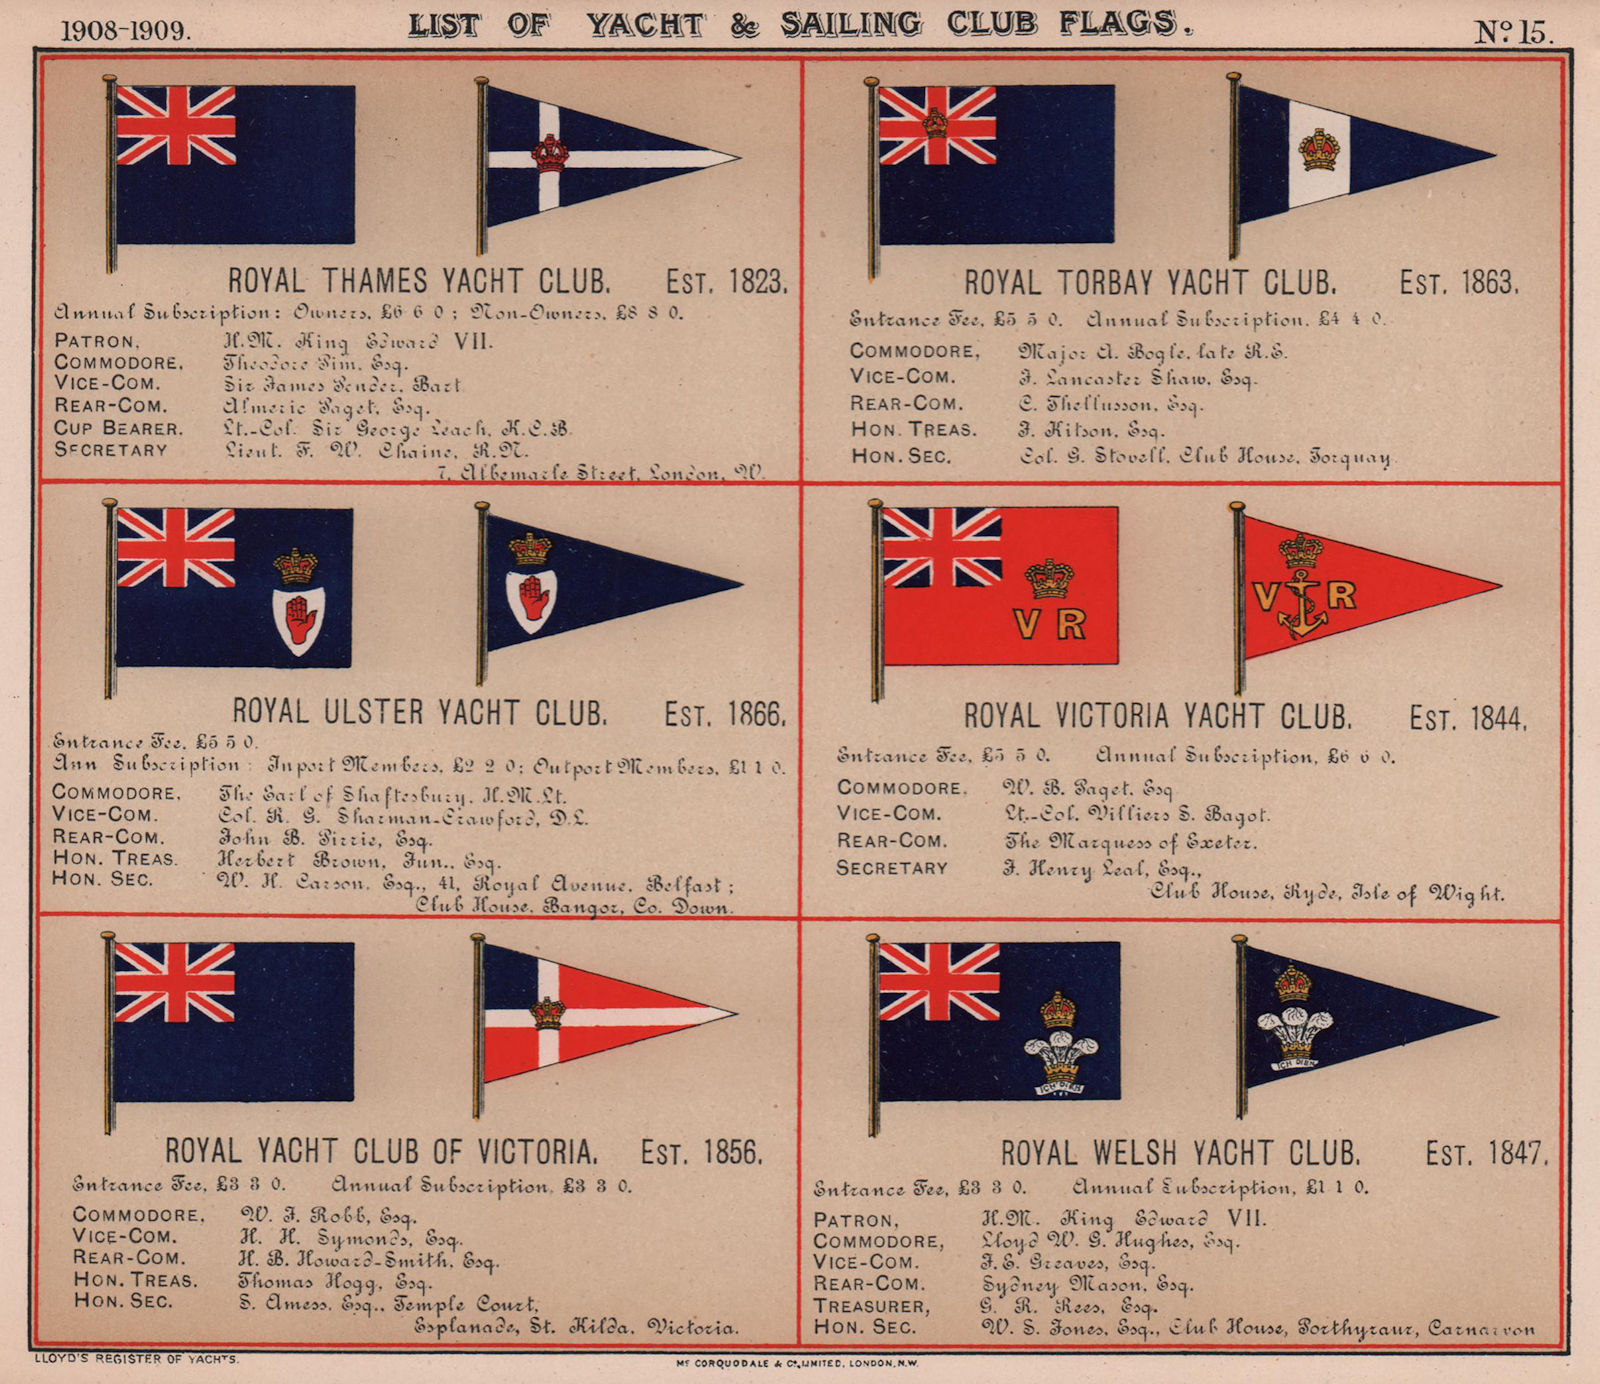 ROYAL YACHT & SAILING CLUB FLAGS T-W Thames Torbay Ulster Victoria Welsh 1908